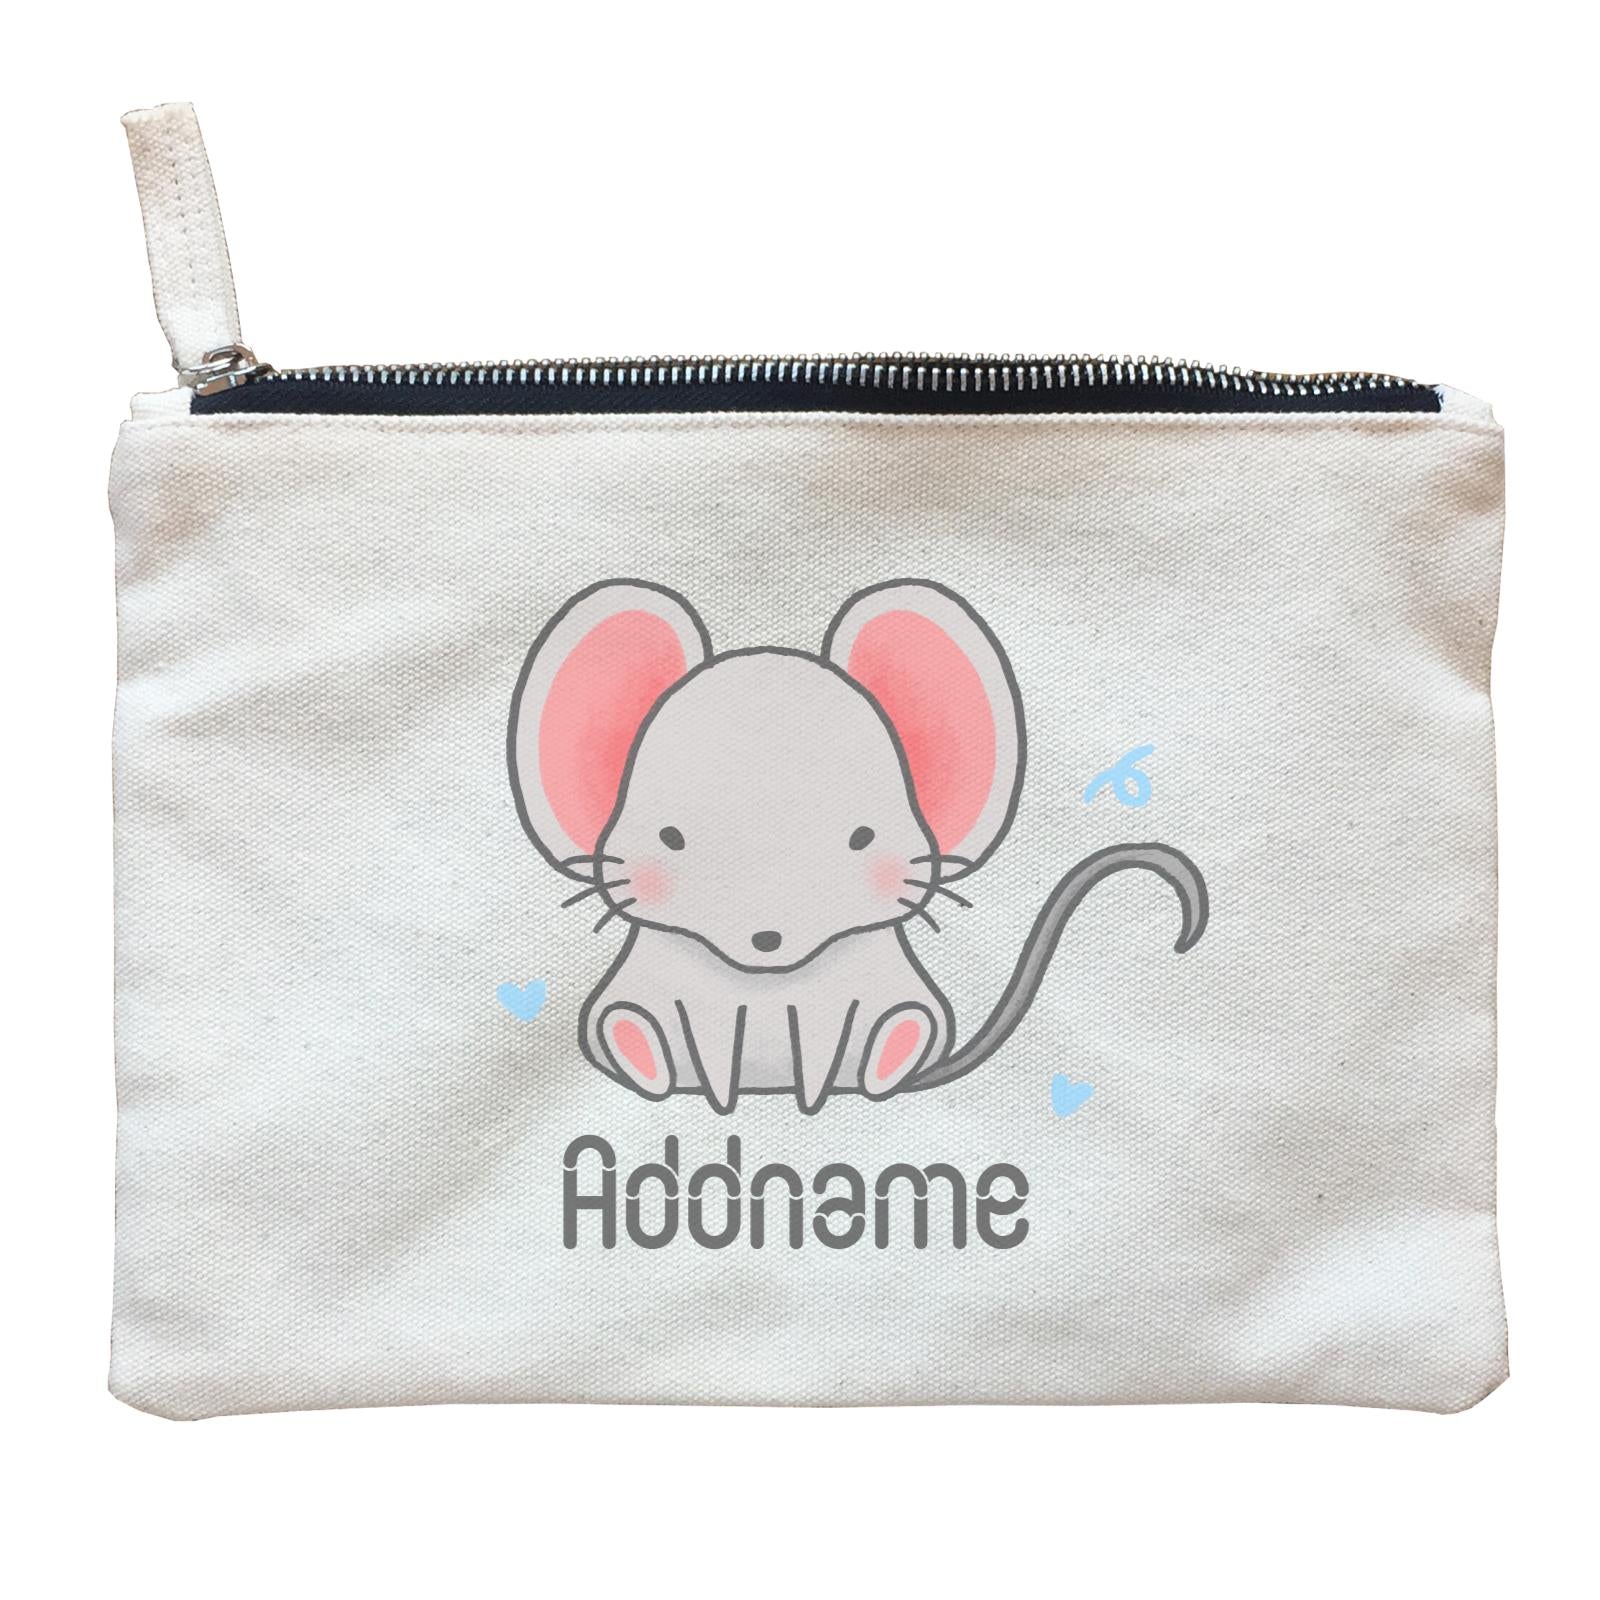 Cute Hand Drawn Style Mouse Addname Zipper Pouch